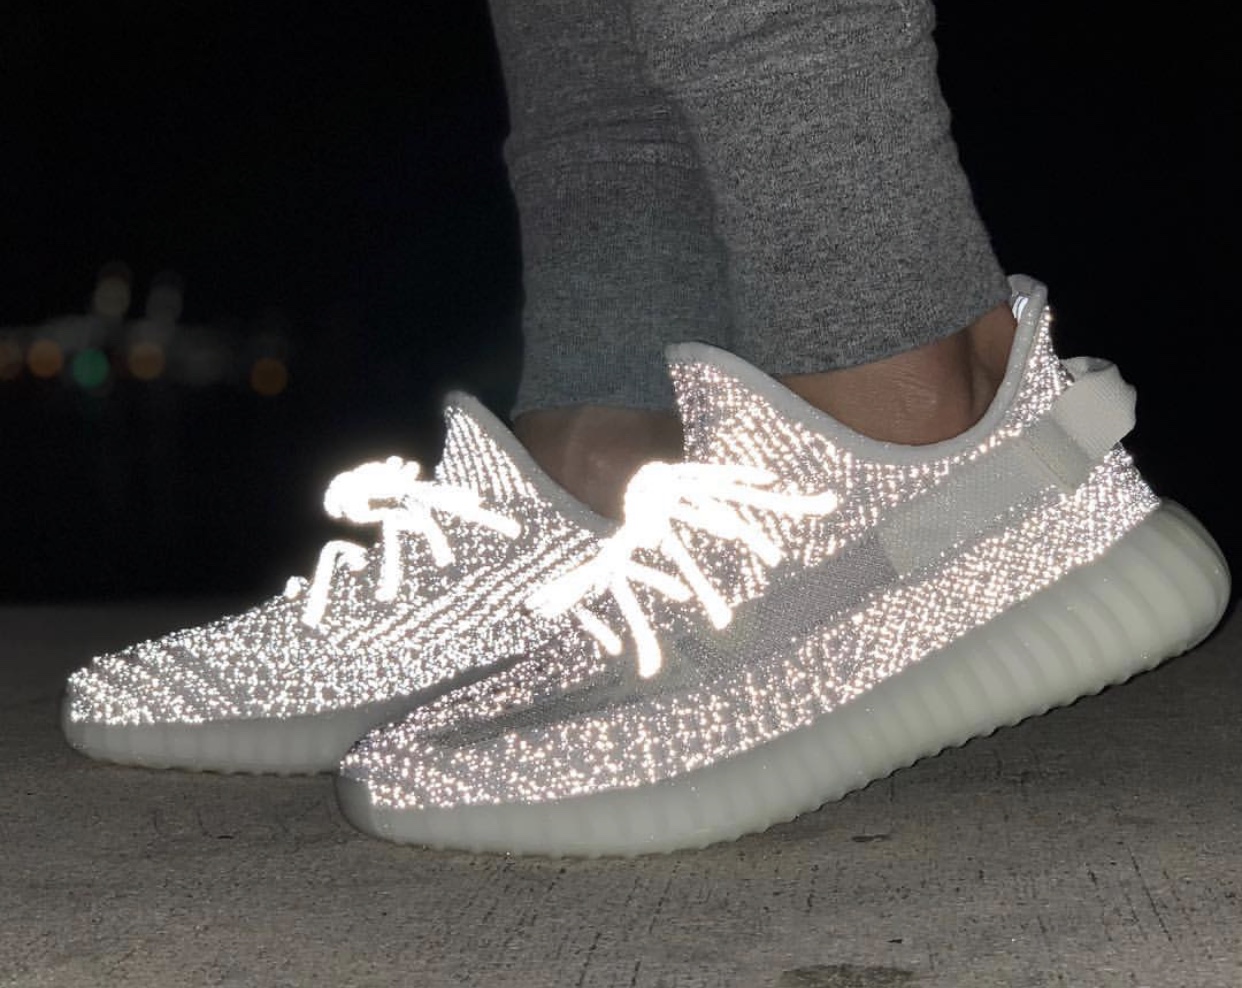 yeezy boost static reflective release date